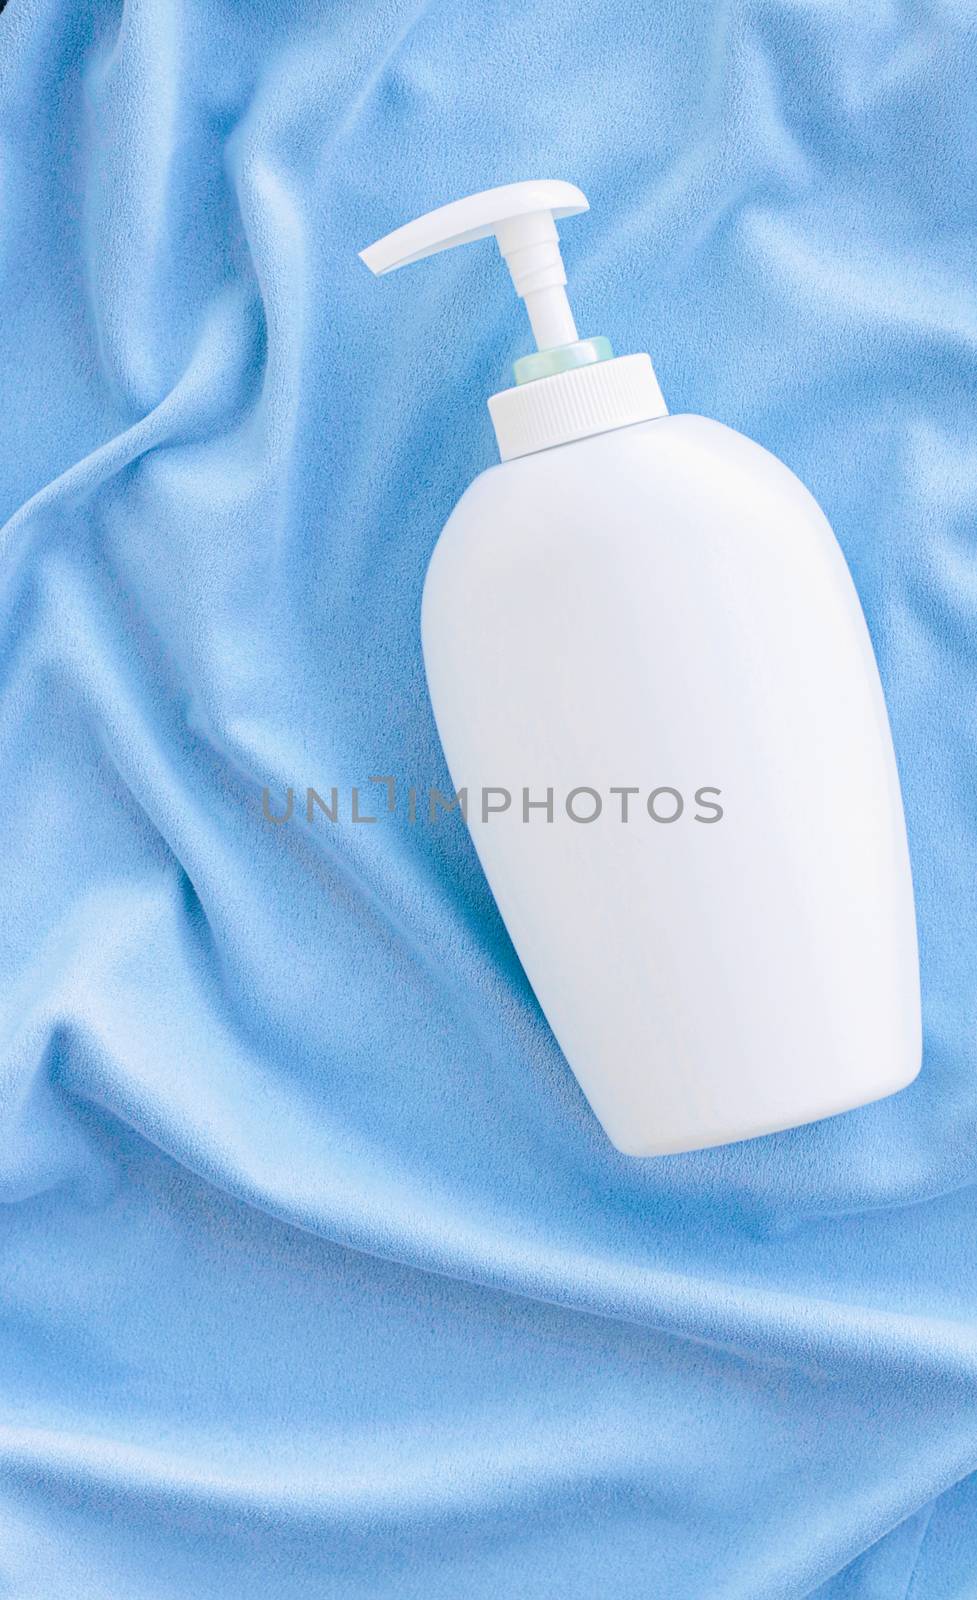 Blank label bottle of antibacterial liquid soap and hand sanitizer mockup on blue silk, hygiene product and health care, flatlay